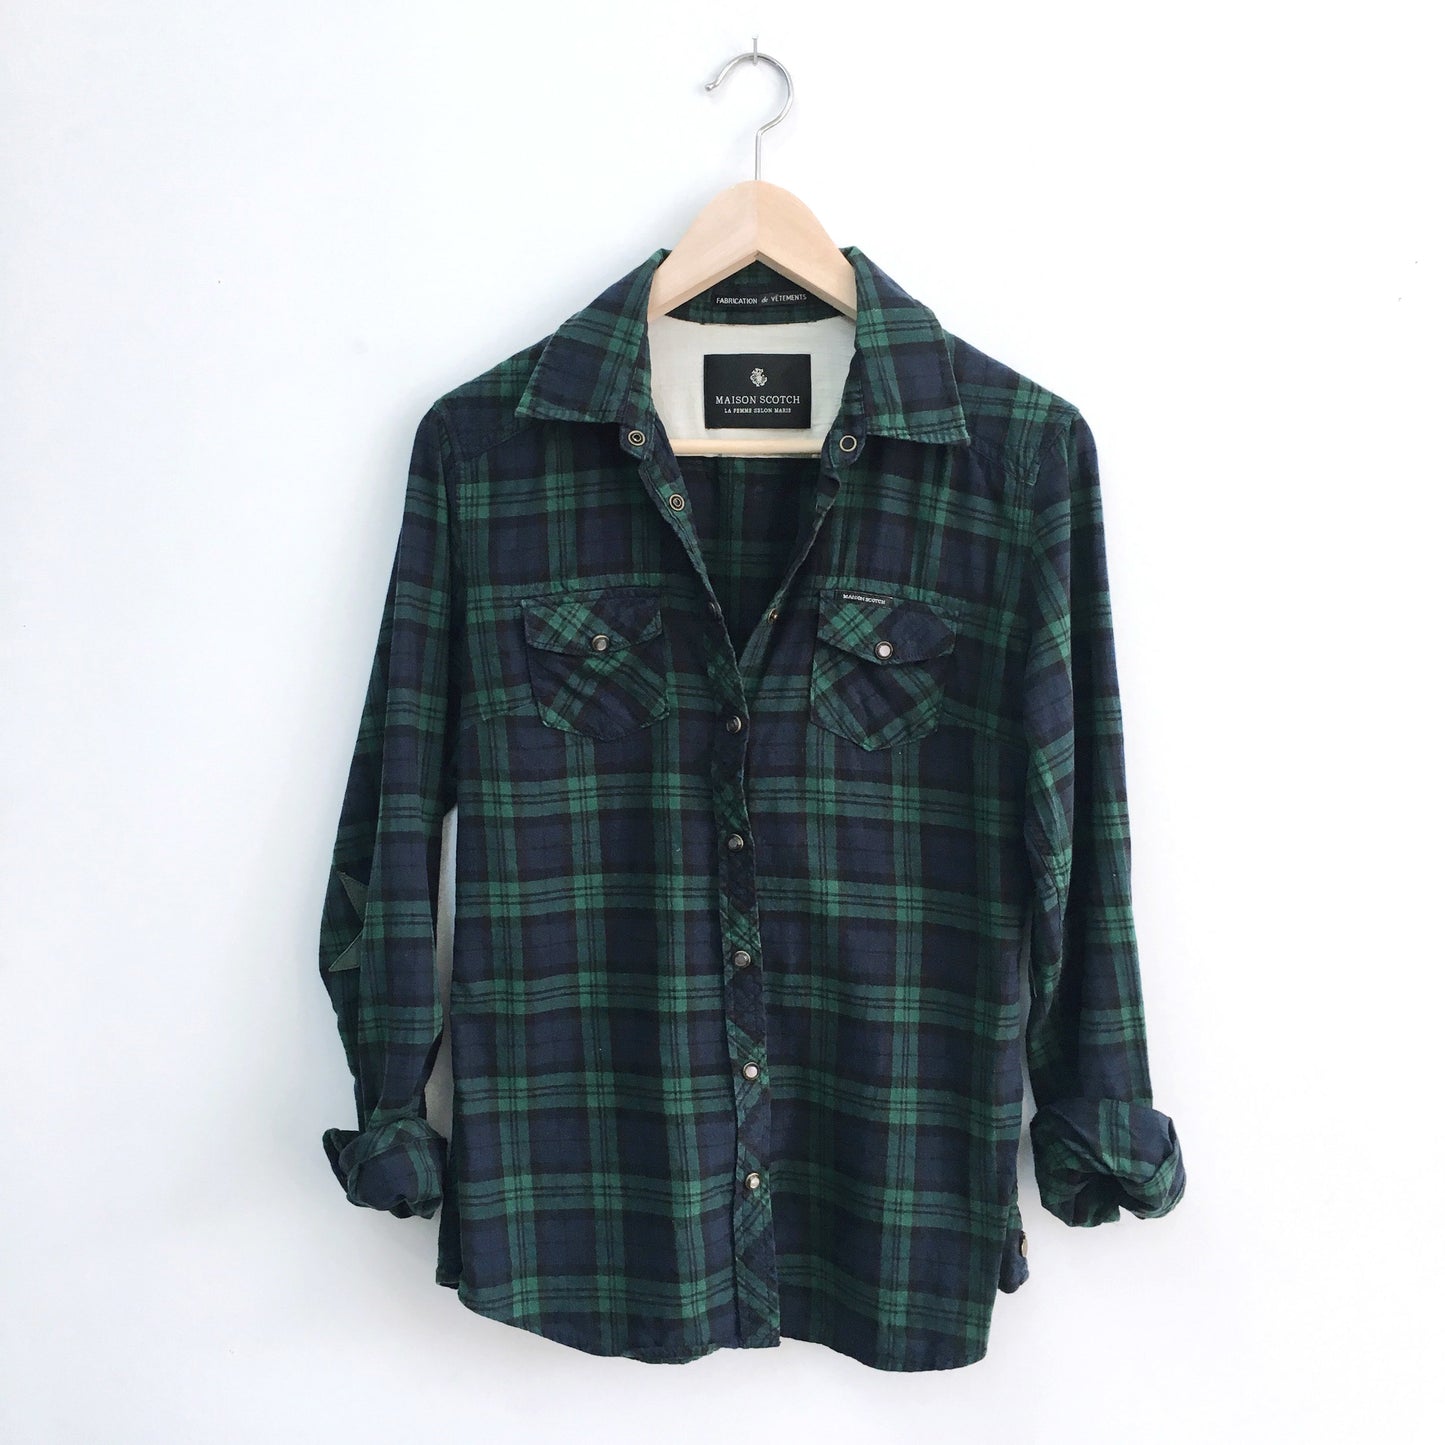 Maison Scotch Flannel with elbow patch - size 2